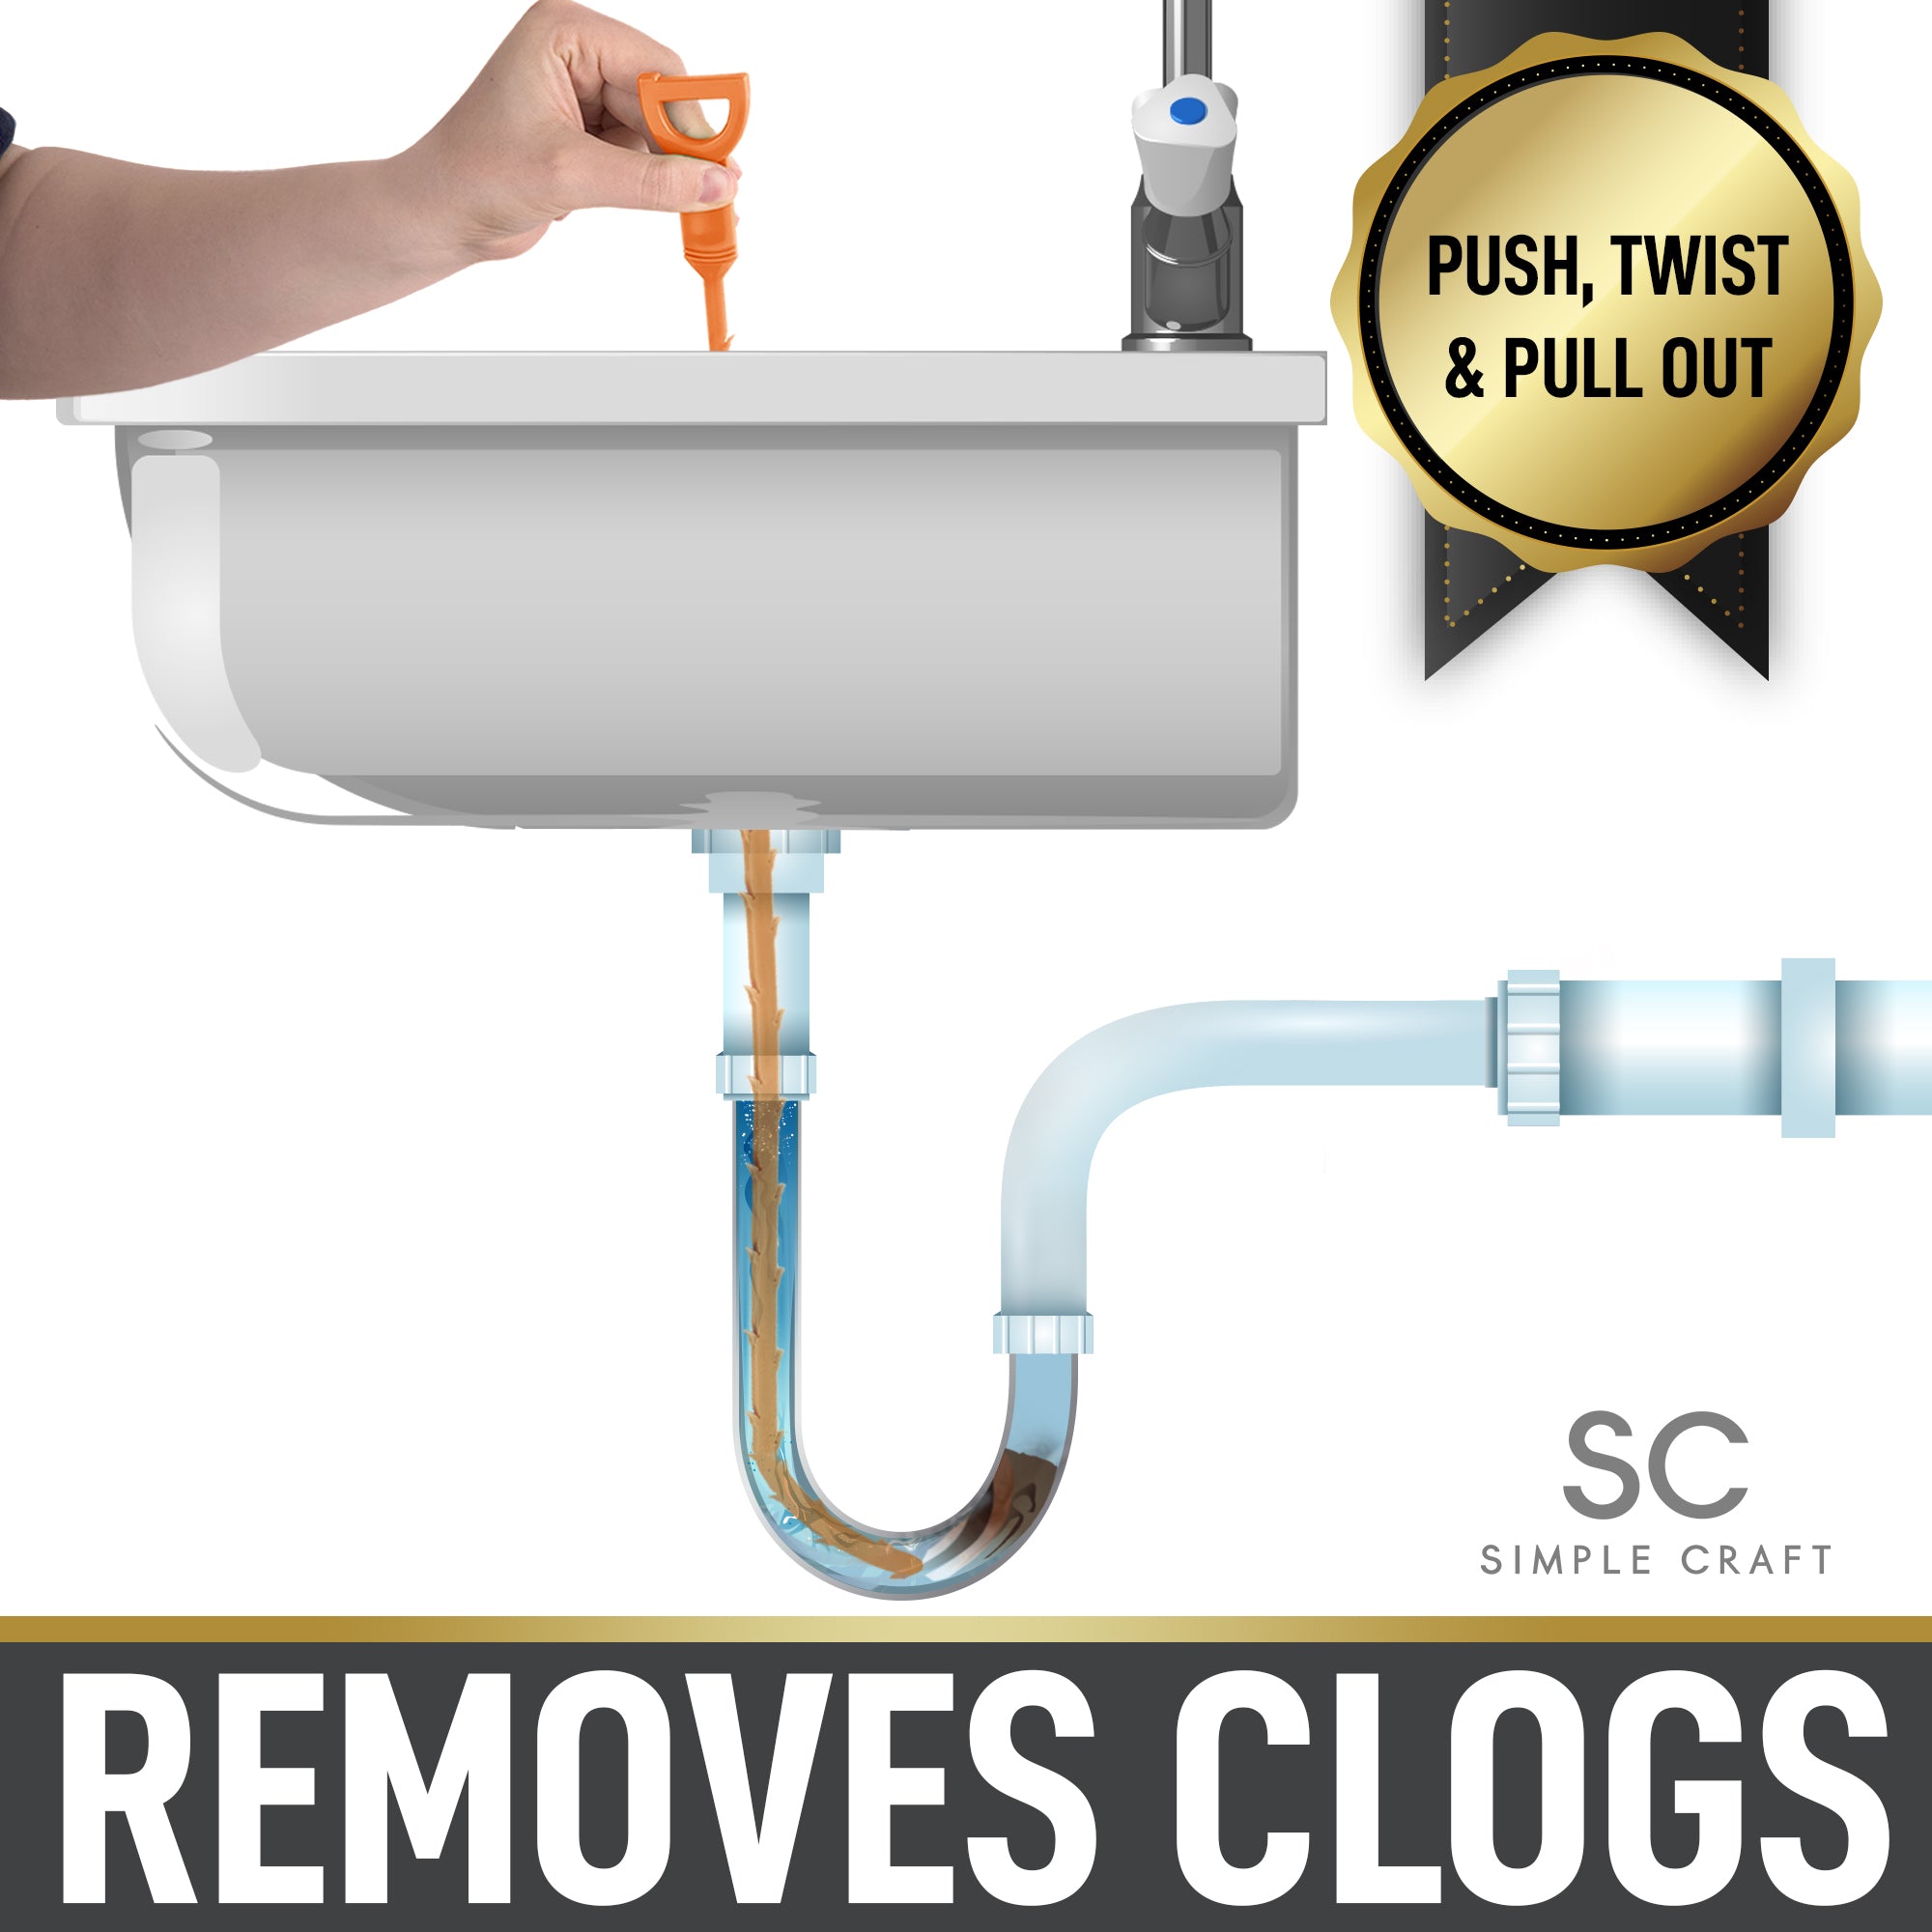 5 Simple Drain Cleaning Tools To Keep at Home